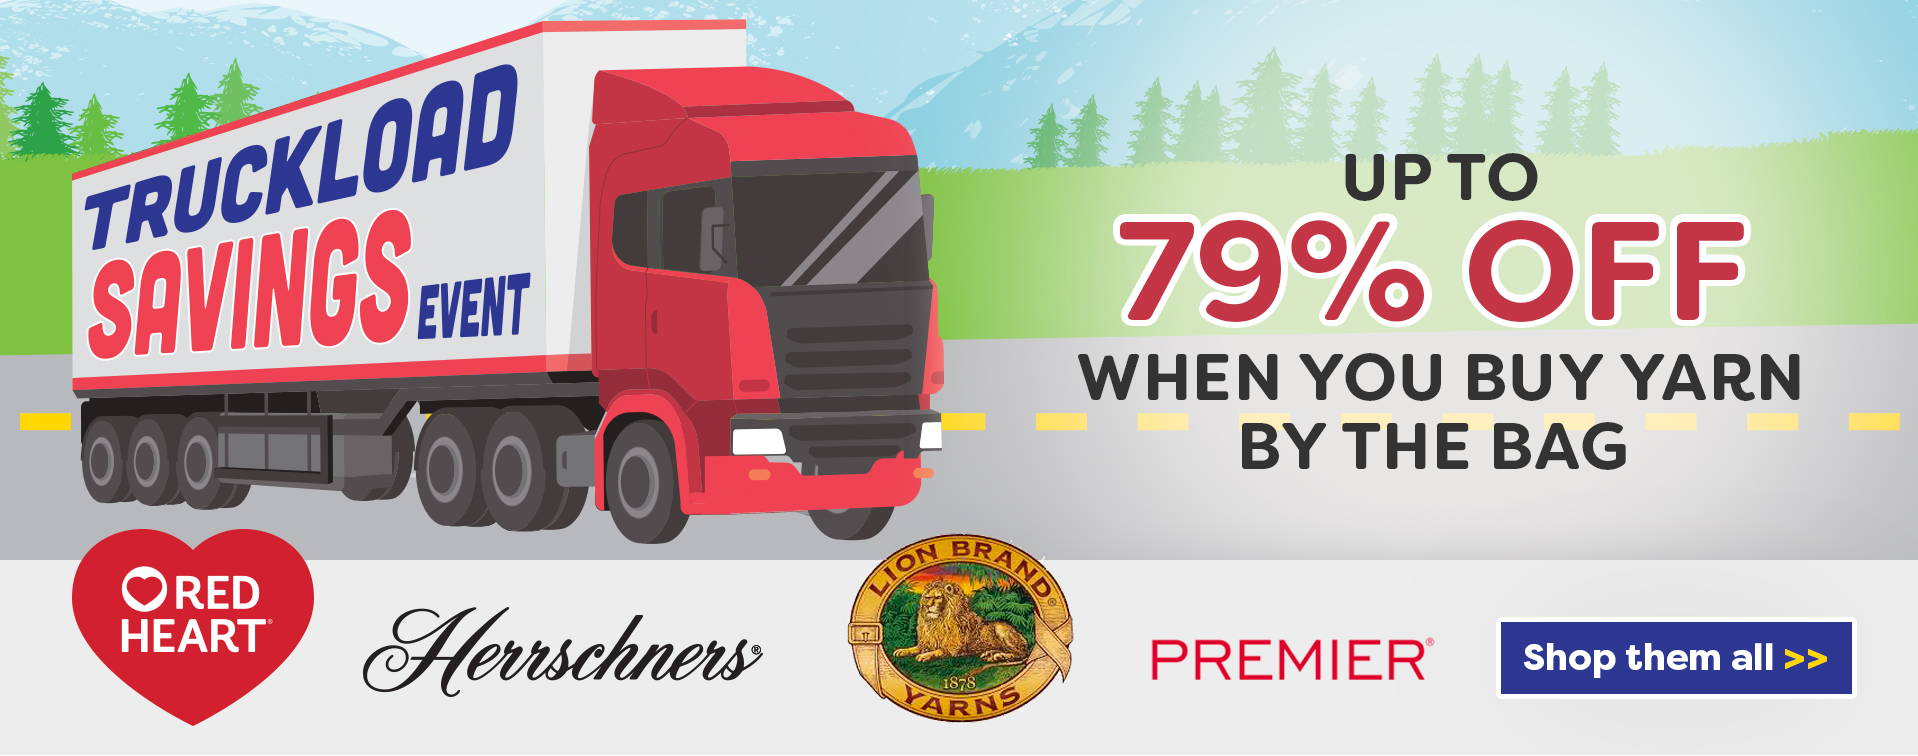 Truckload Savings Event Up to 79% off when you buy yarn by the bag.